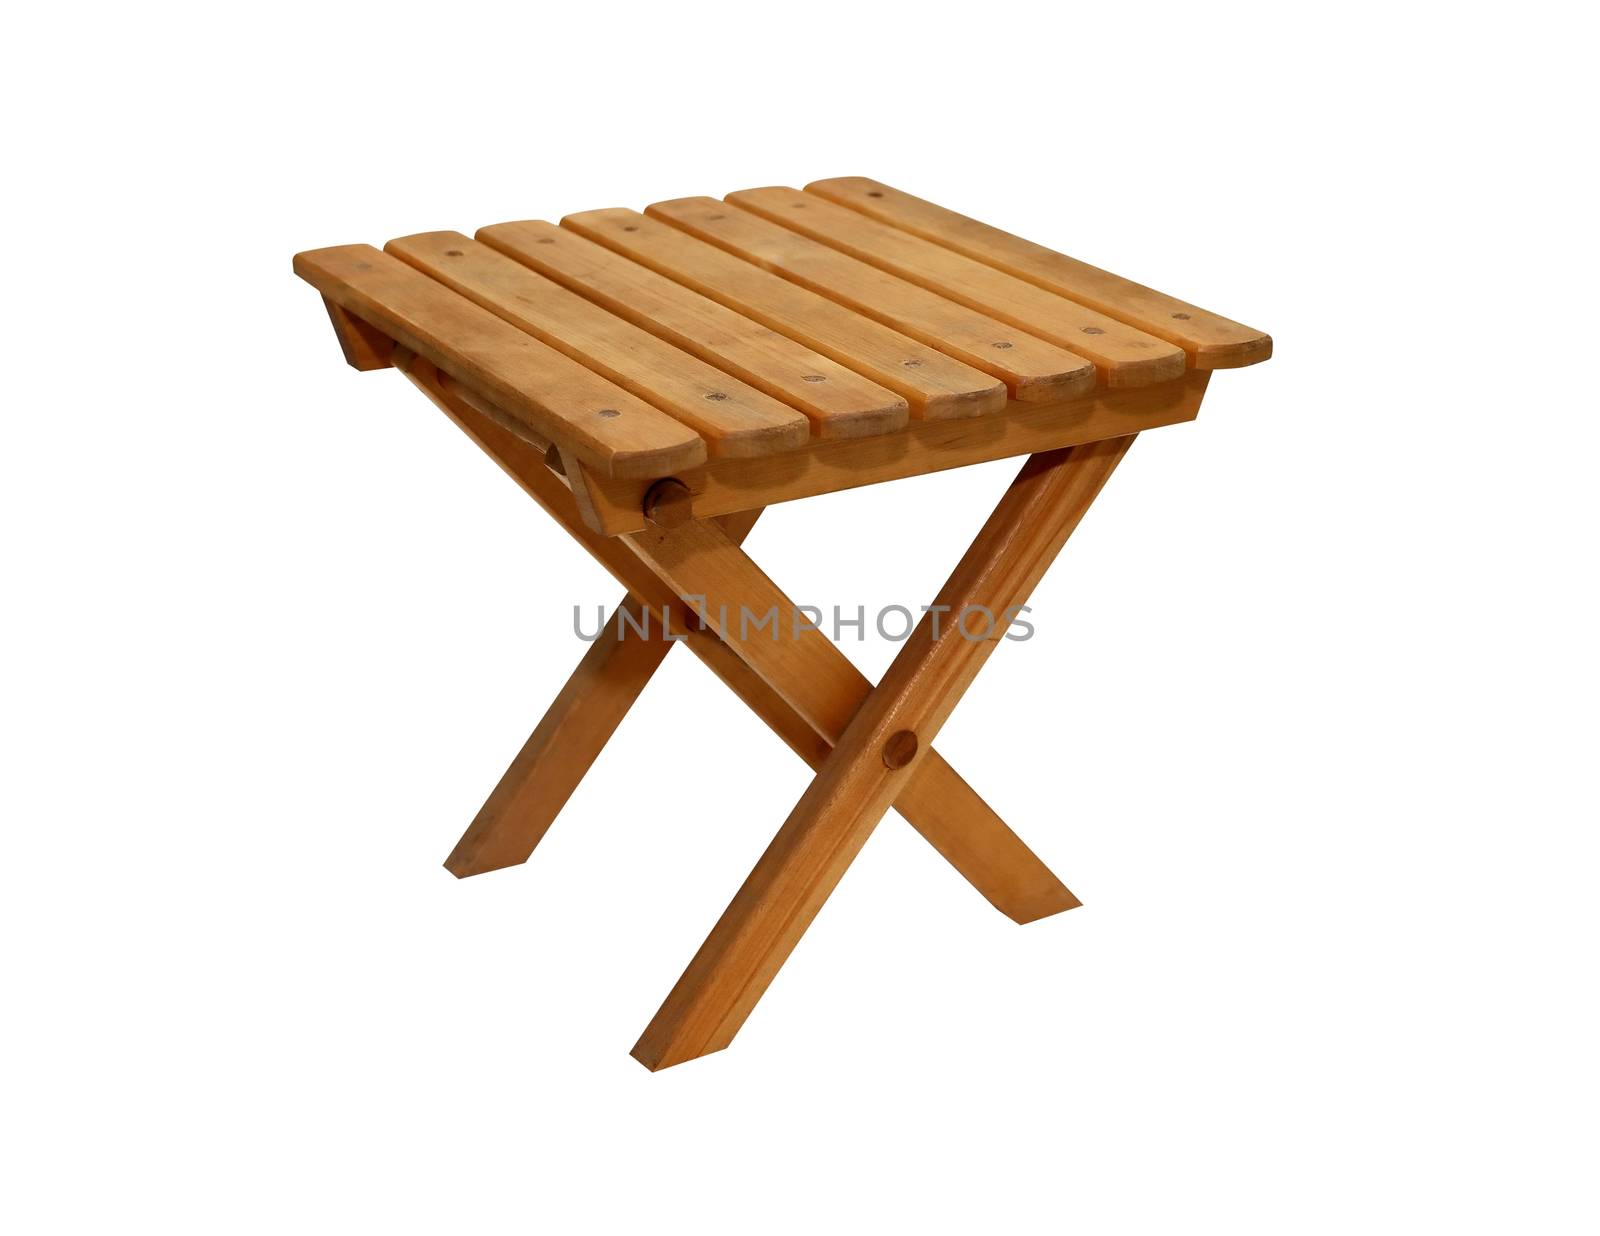 Small wooden stool isolated on white background with clipping path